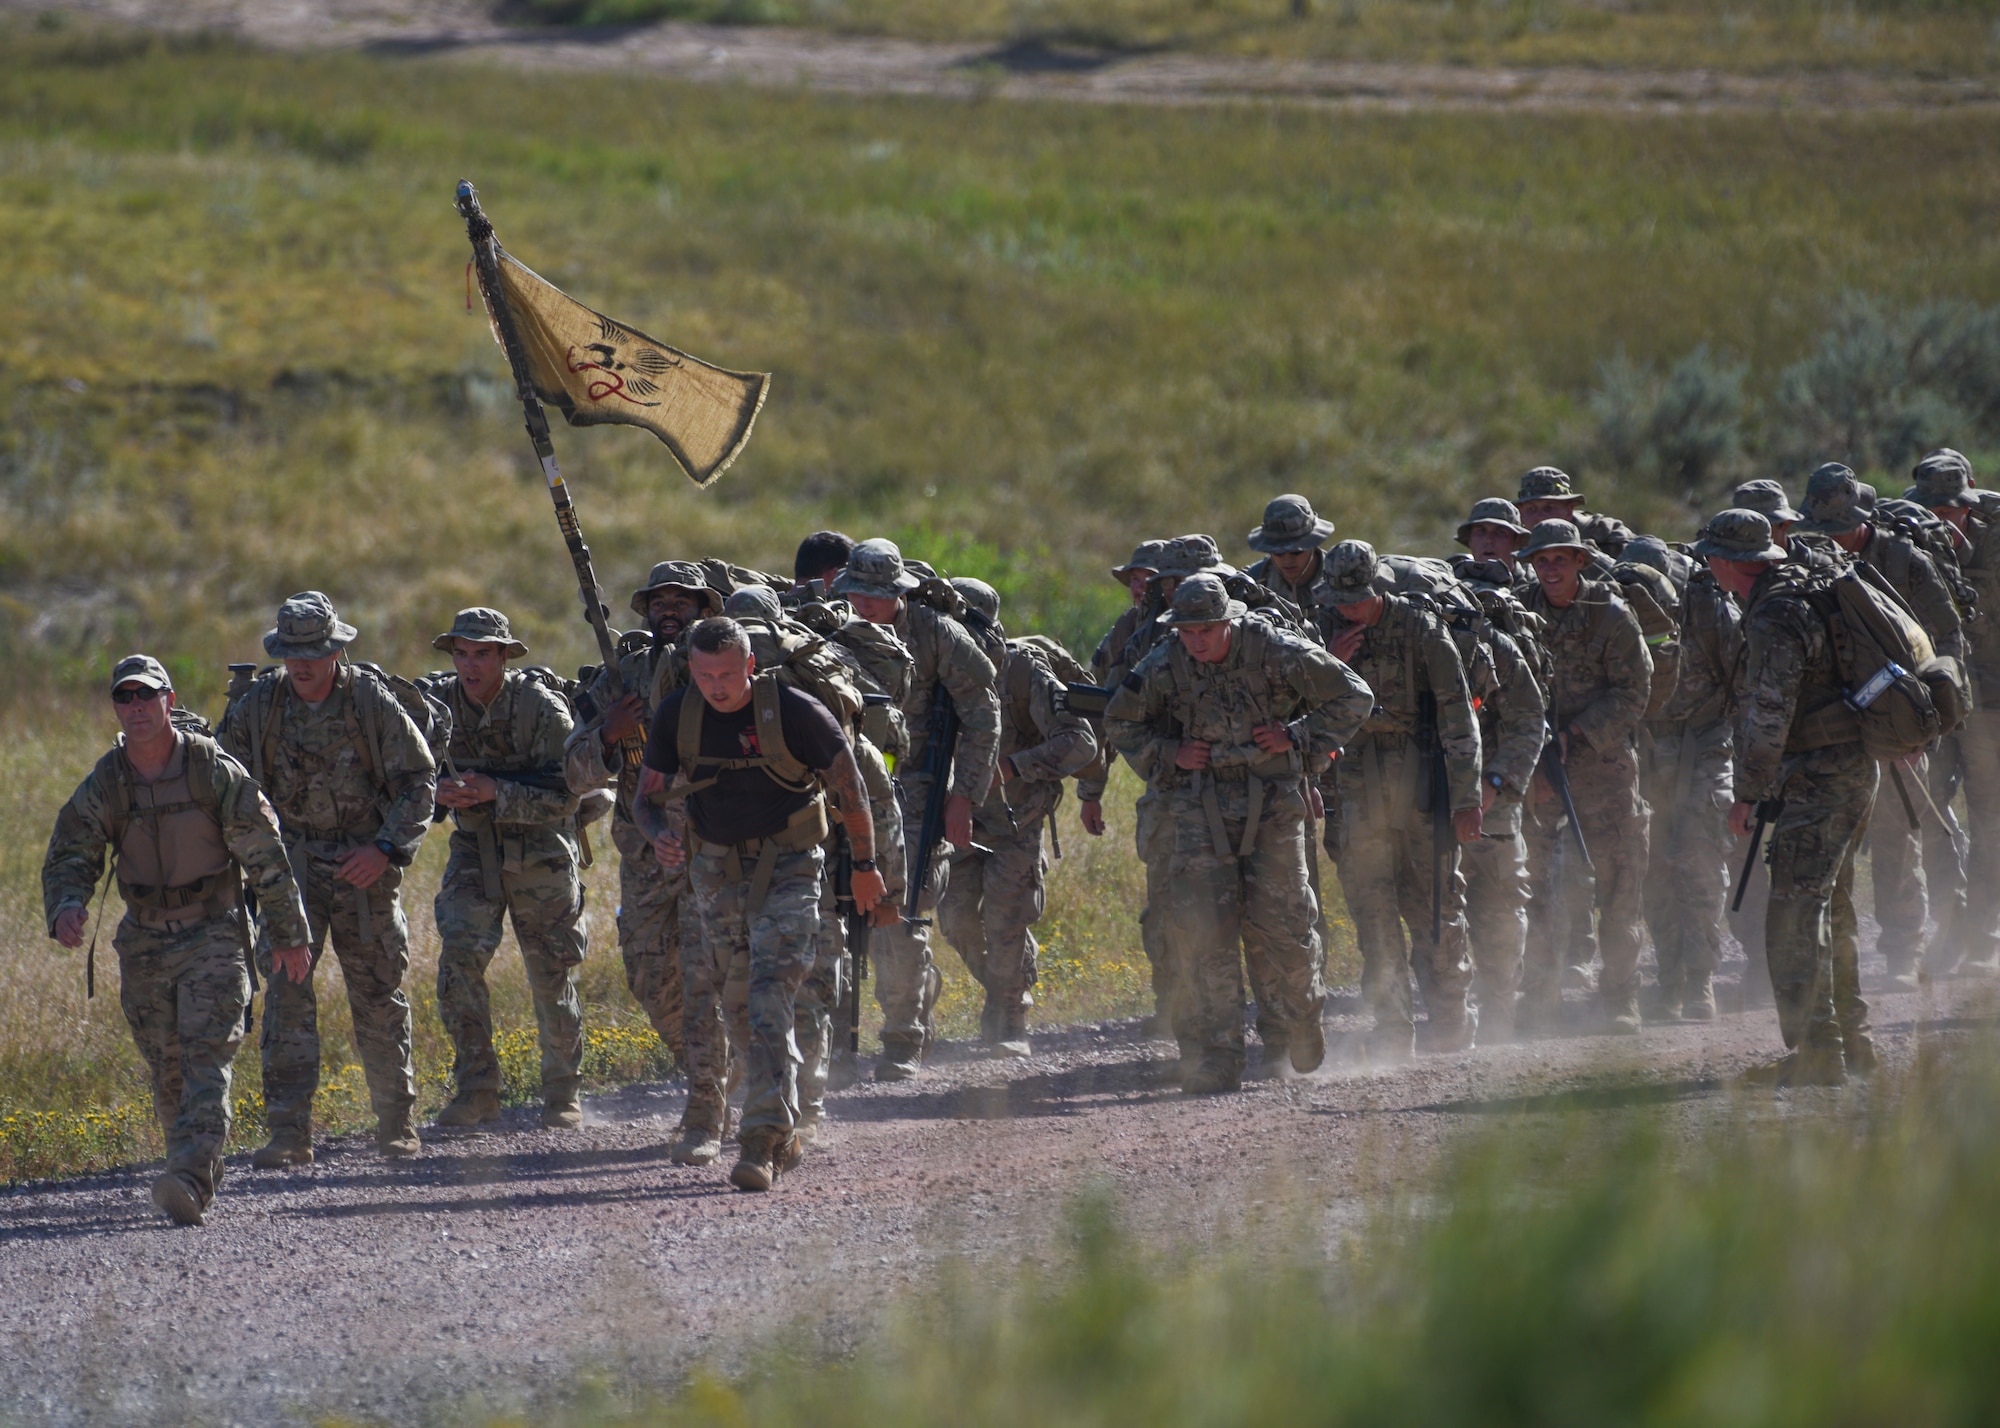 Students and instructors of the Nuclear Advanced Designated Marksman course ruck in formation at Camp Guernsey, Wyo., Sept. 29, 2019. The ruck applied stress to the students before their final-shot test, tiring out their muscles and nerves to create a realistic scenario they could face on the battlefield. (U.S. Air Force photo by Staff Sgt. Ashley N. Sokolov)